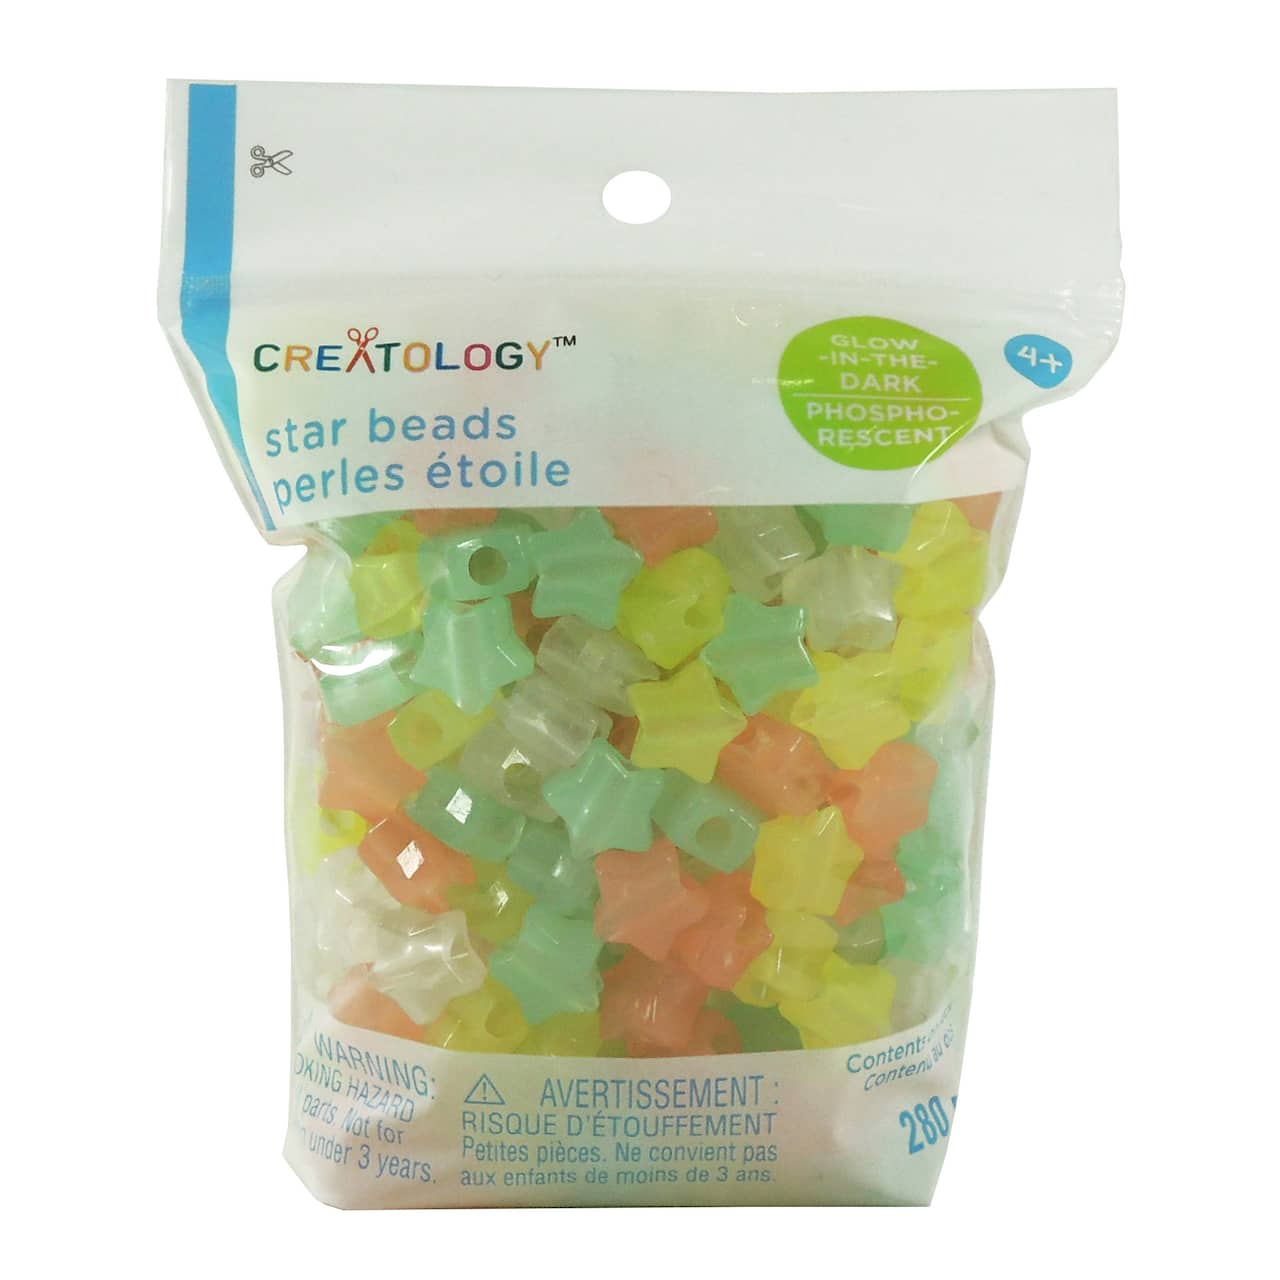 Glow In the Dark Star Beads by Creatology™